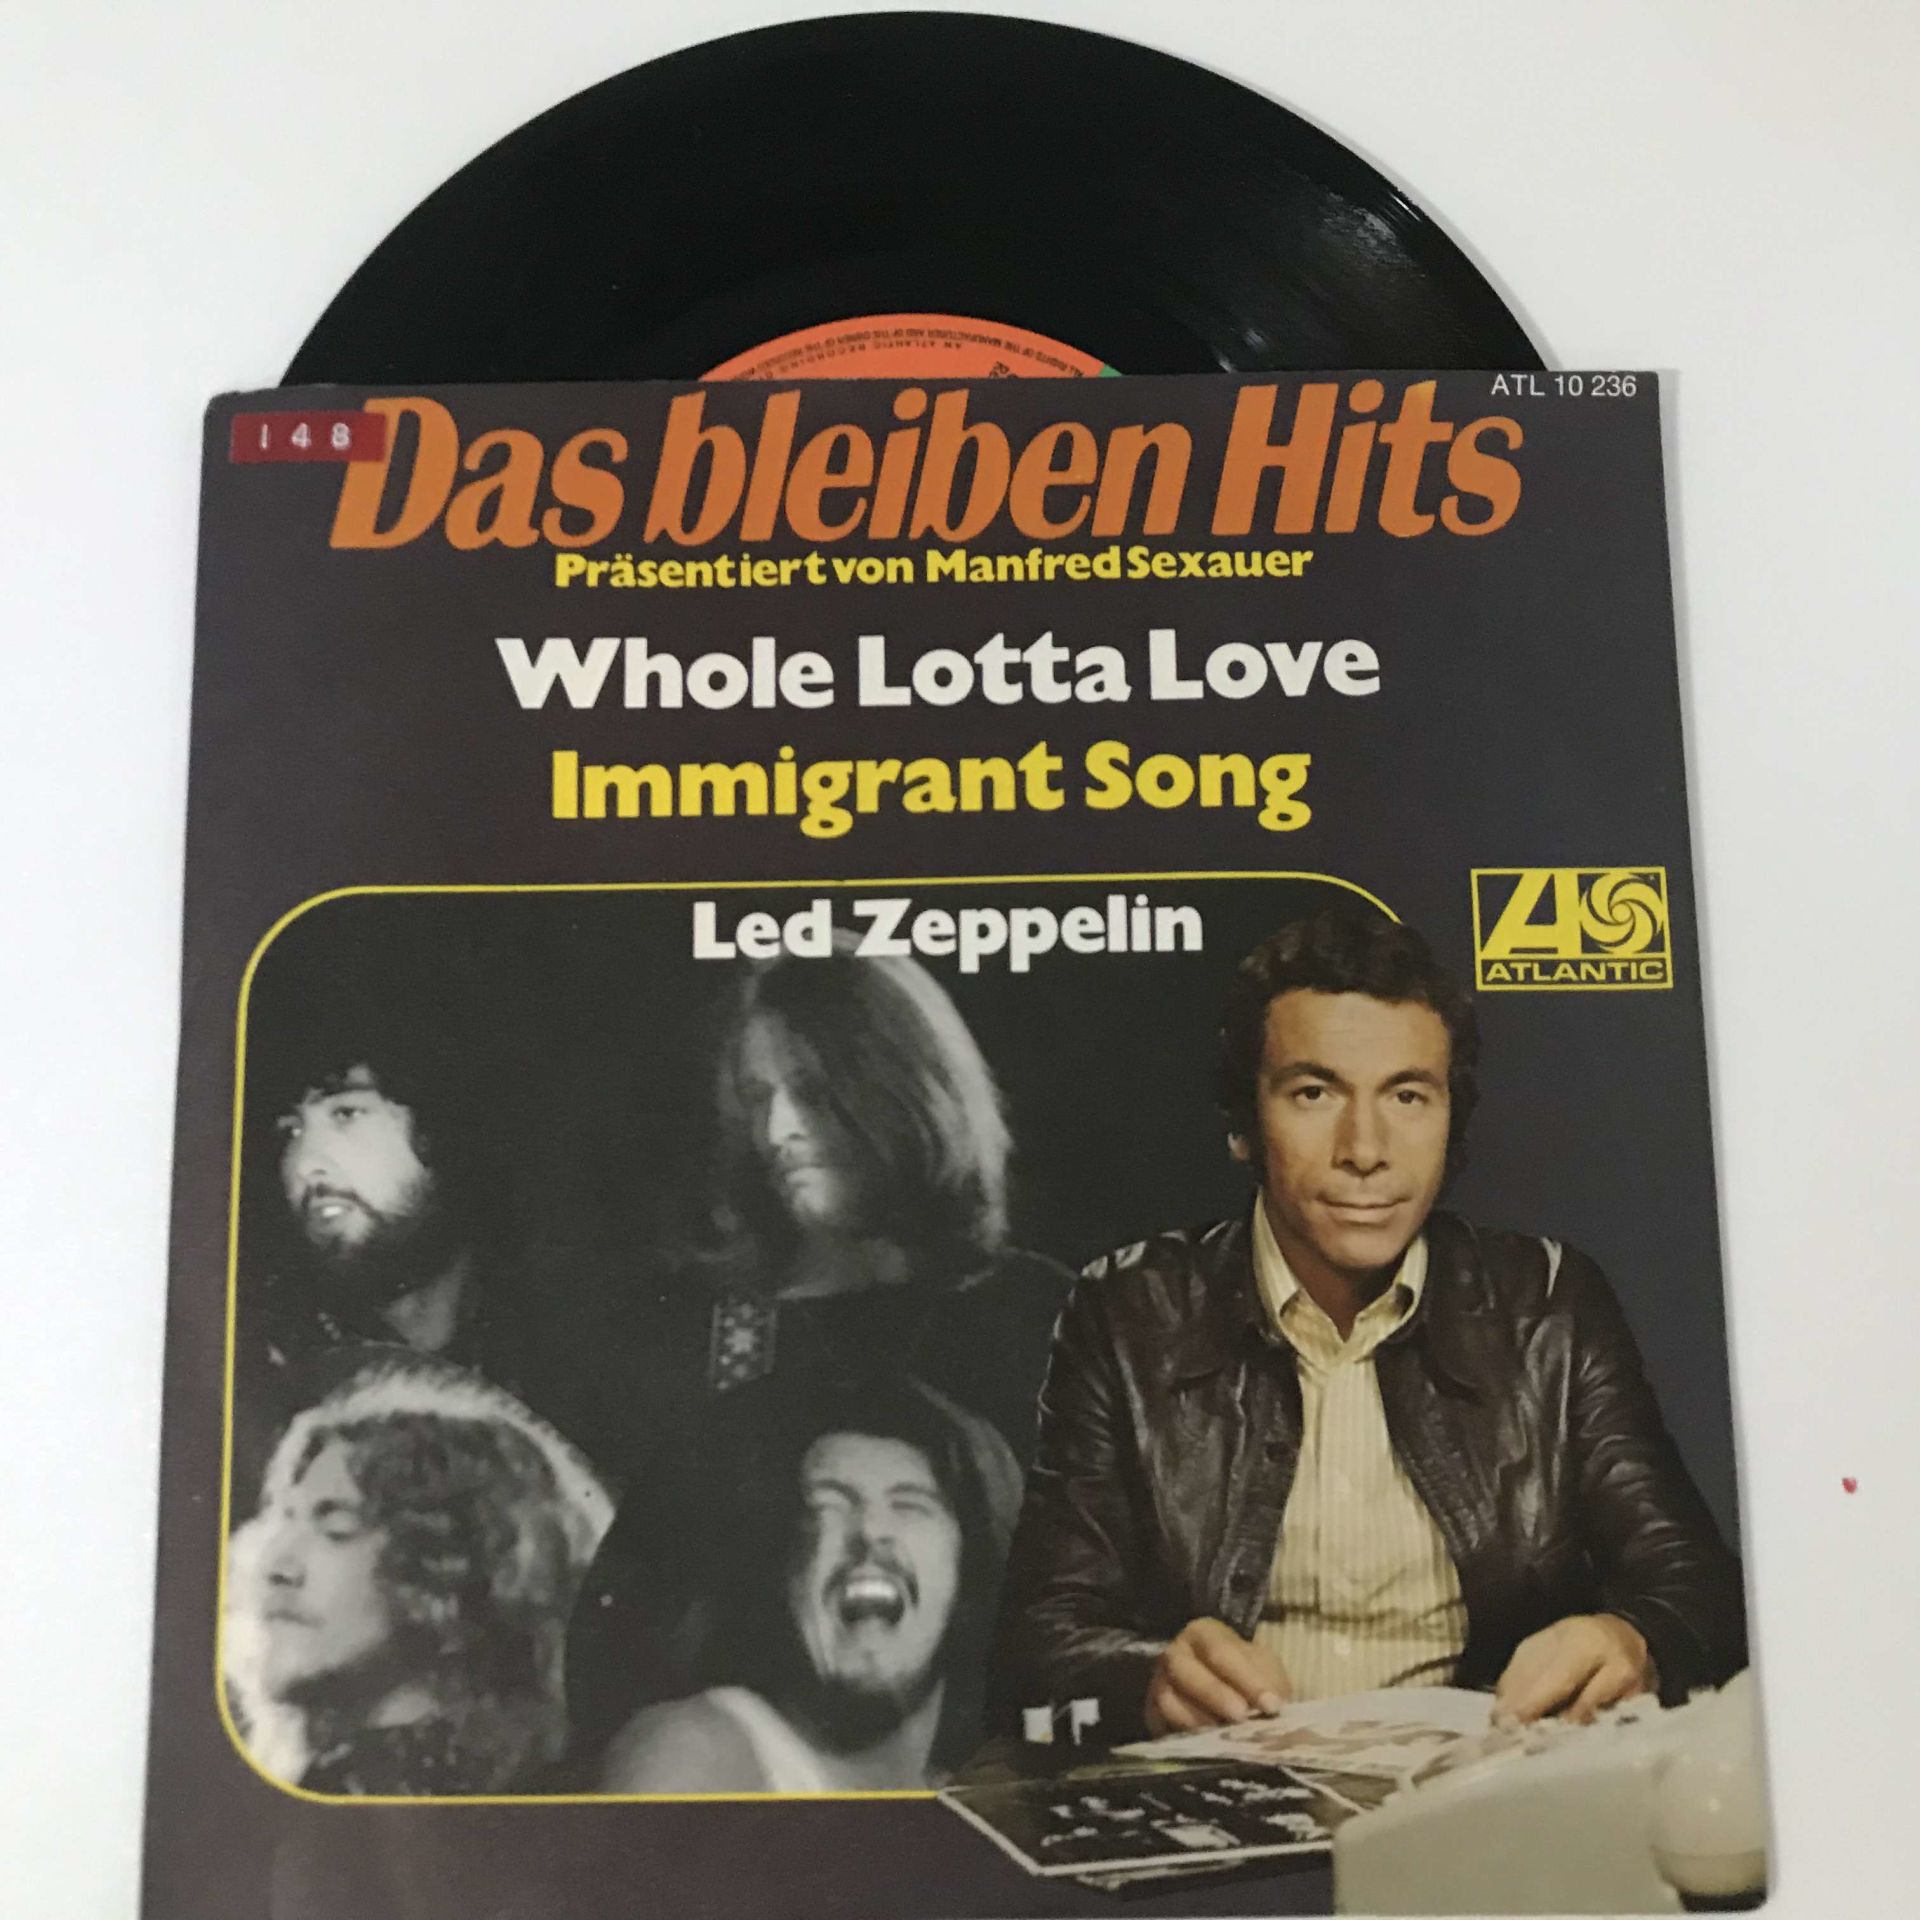 Led Zeppelin – Whole Lotta Love / Immigrant Song